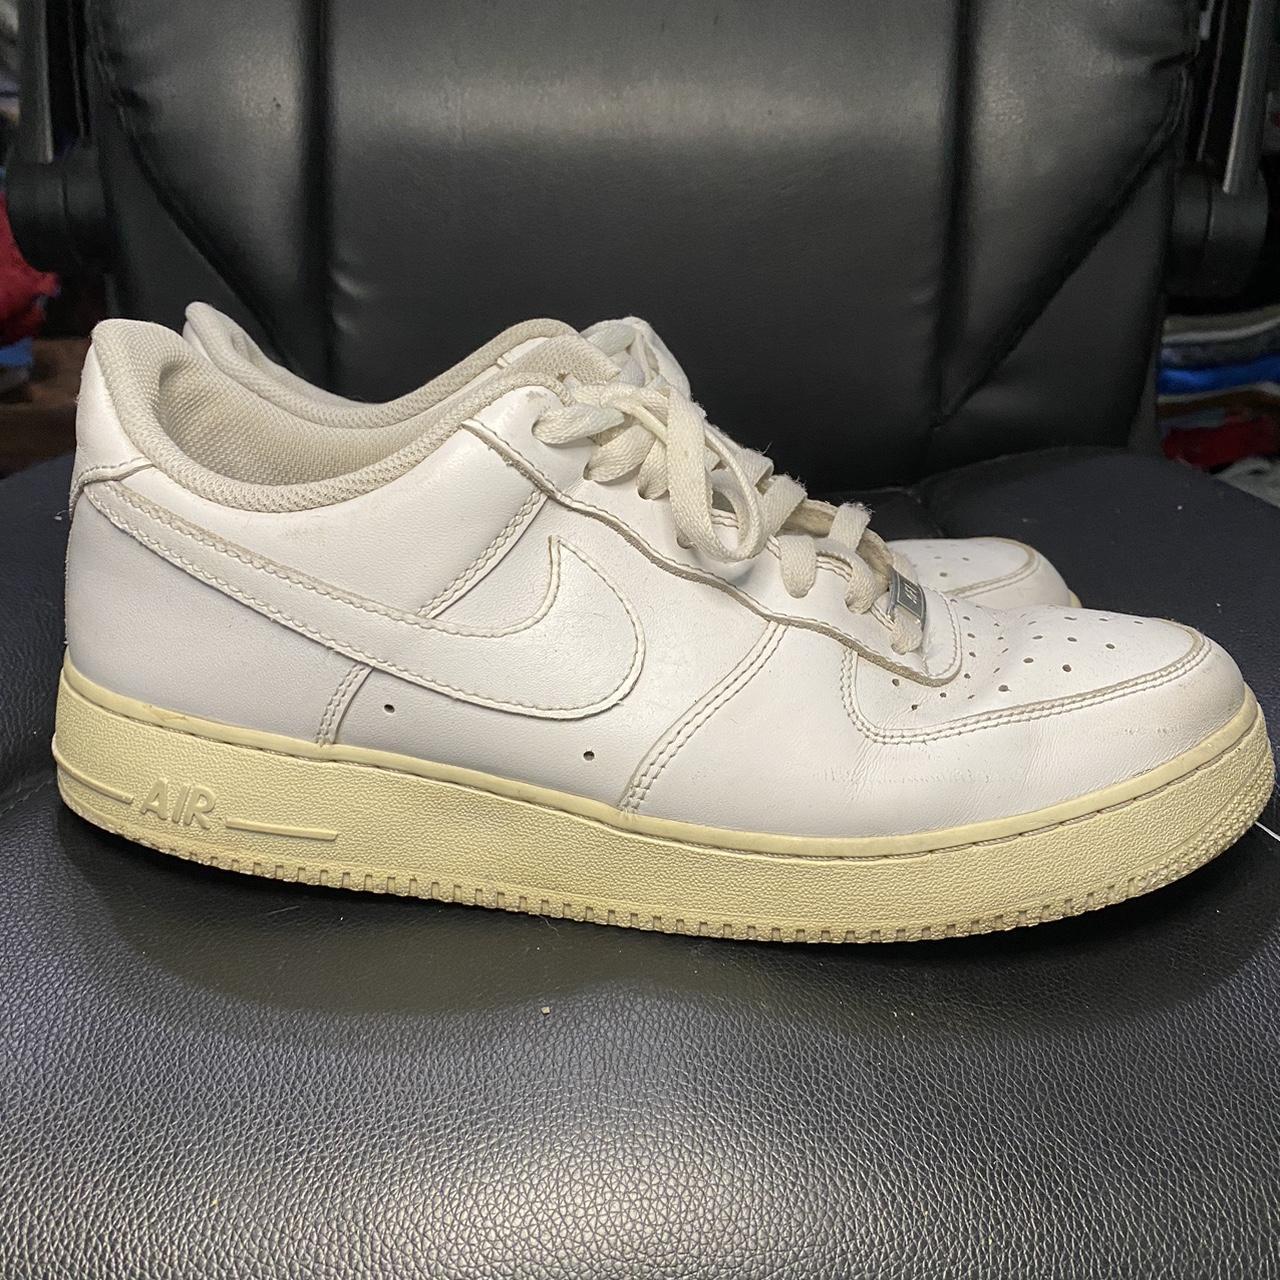 Nike Air Force 1 original from 2001. Size 9 with - Depop